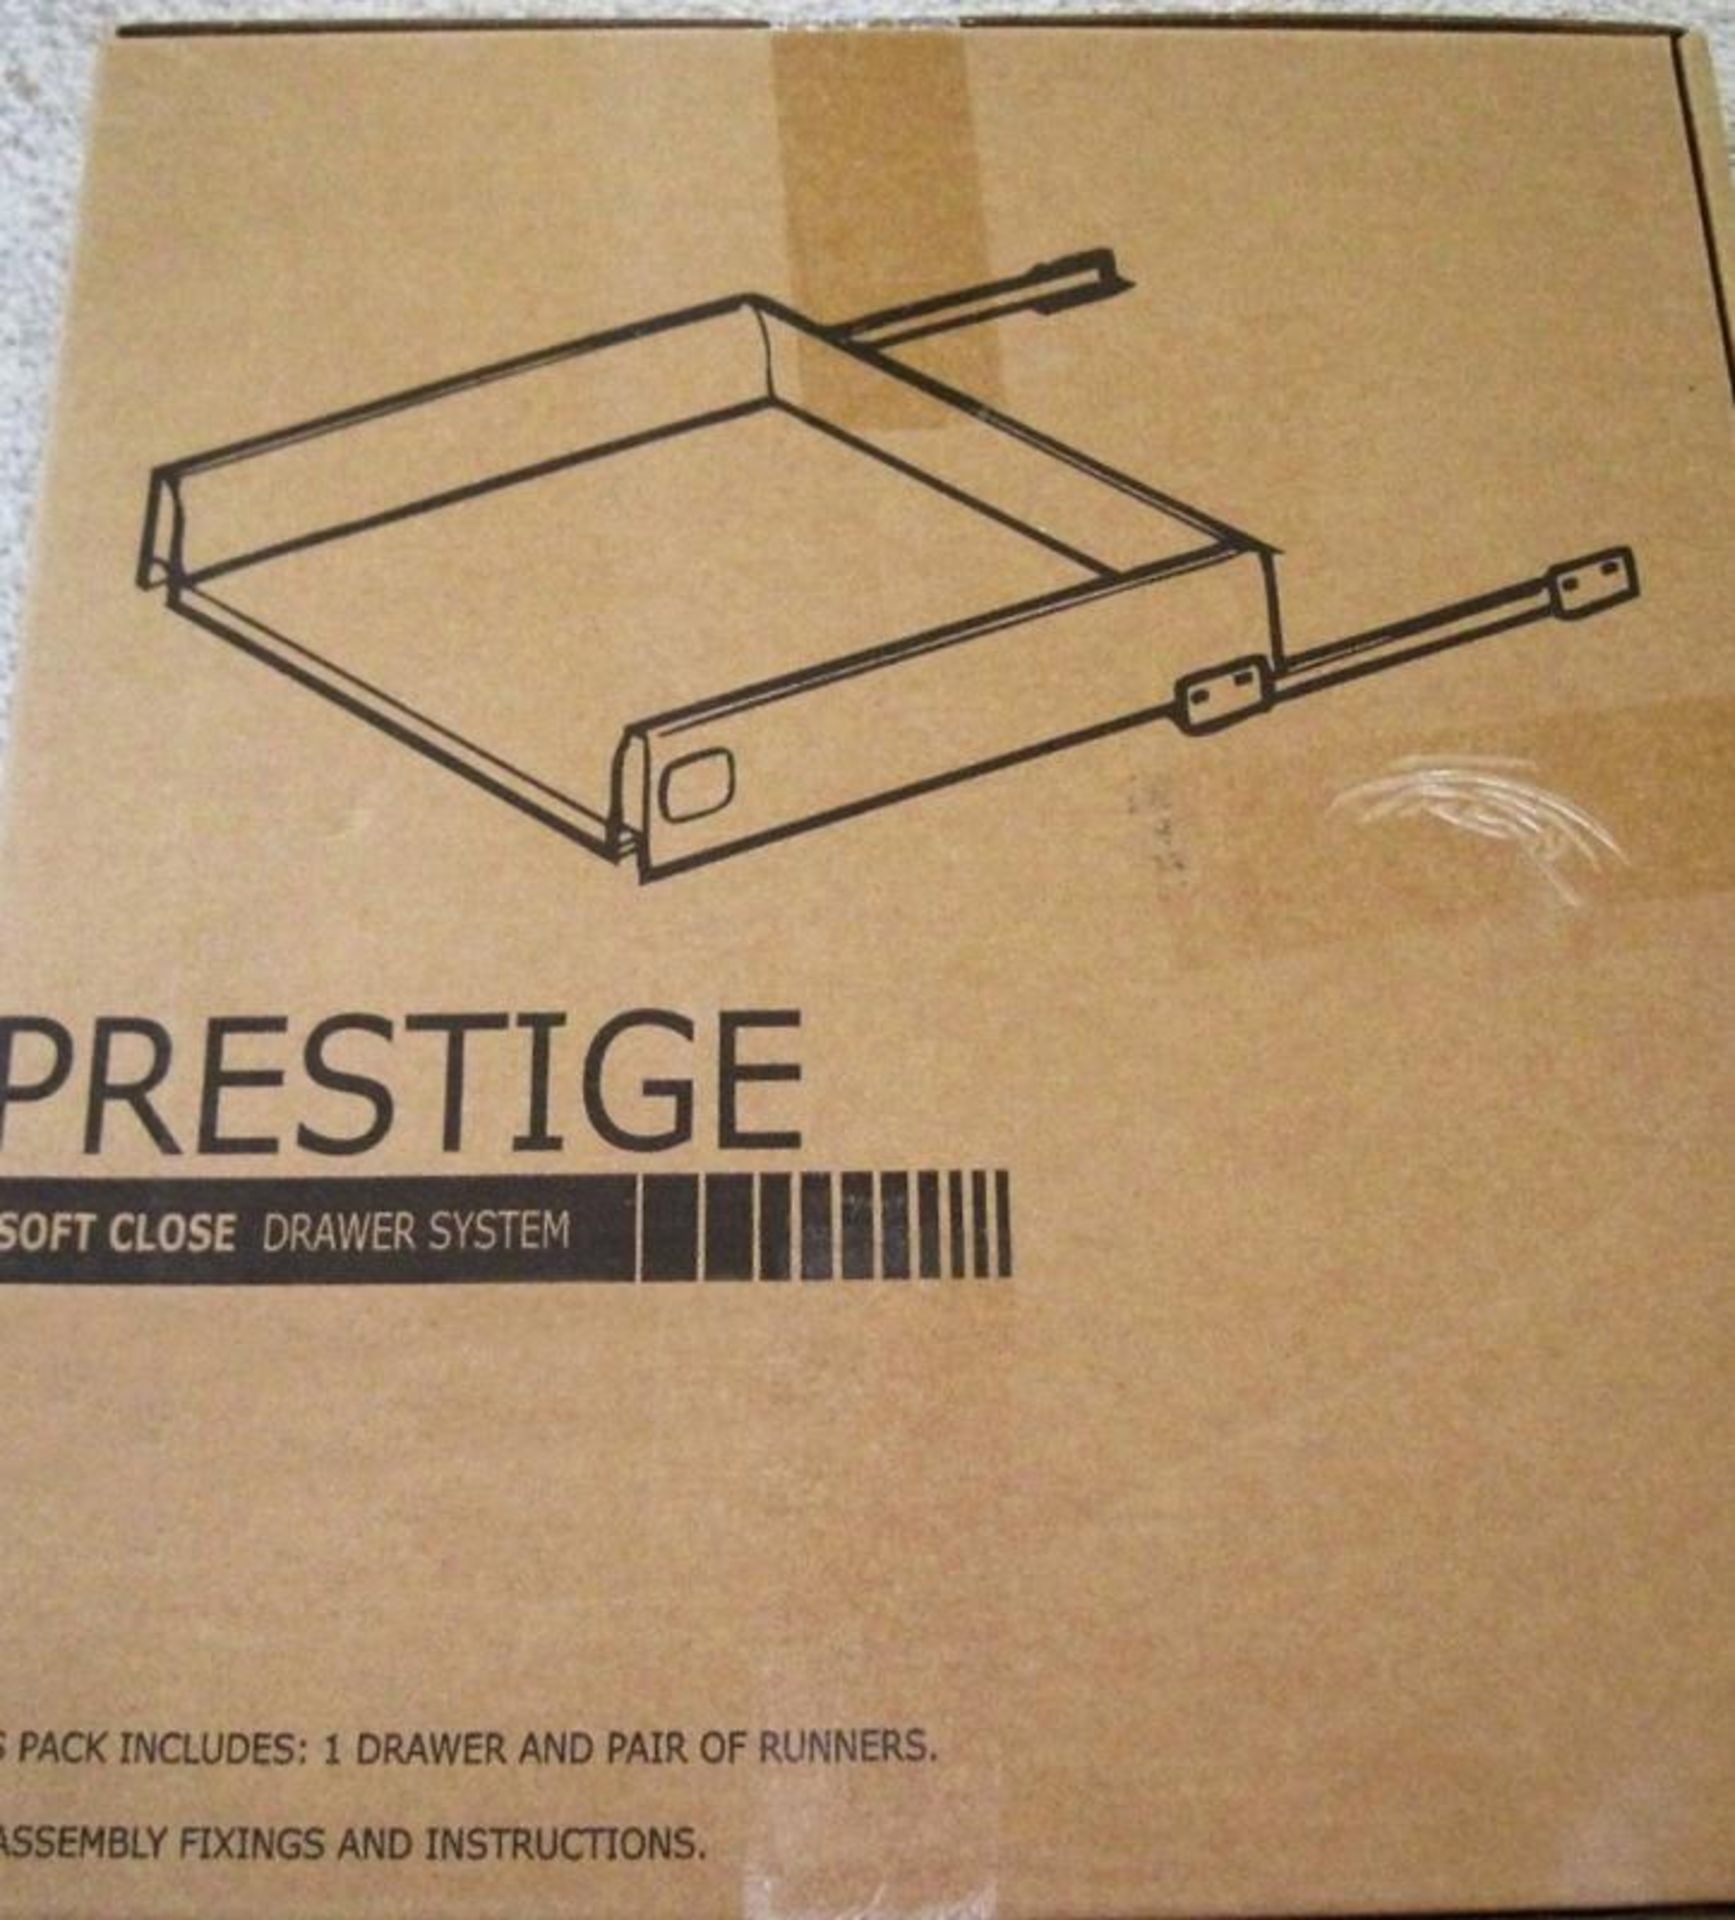 3 x 600mm Soft Close Kitchen Drawer Packs - B&Q Prestige - Brand New Stock - Features Include - Image 2 of 2